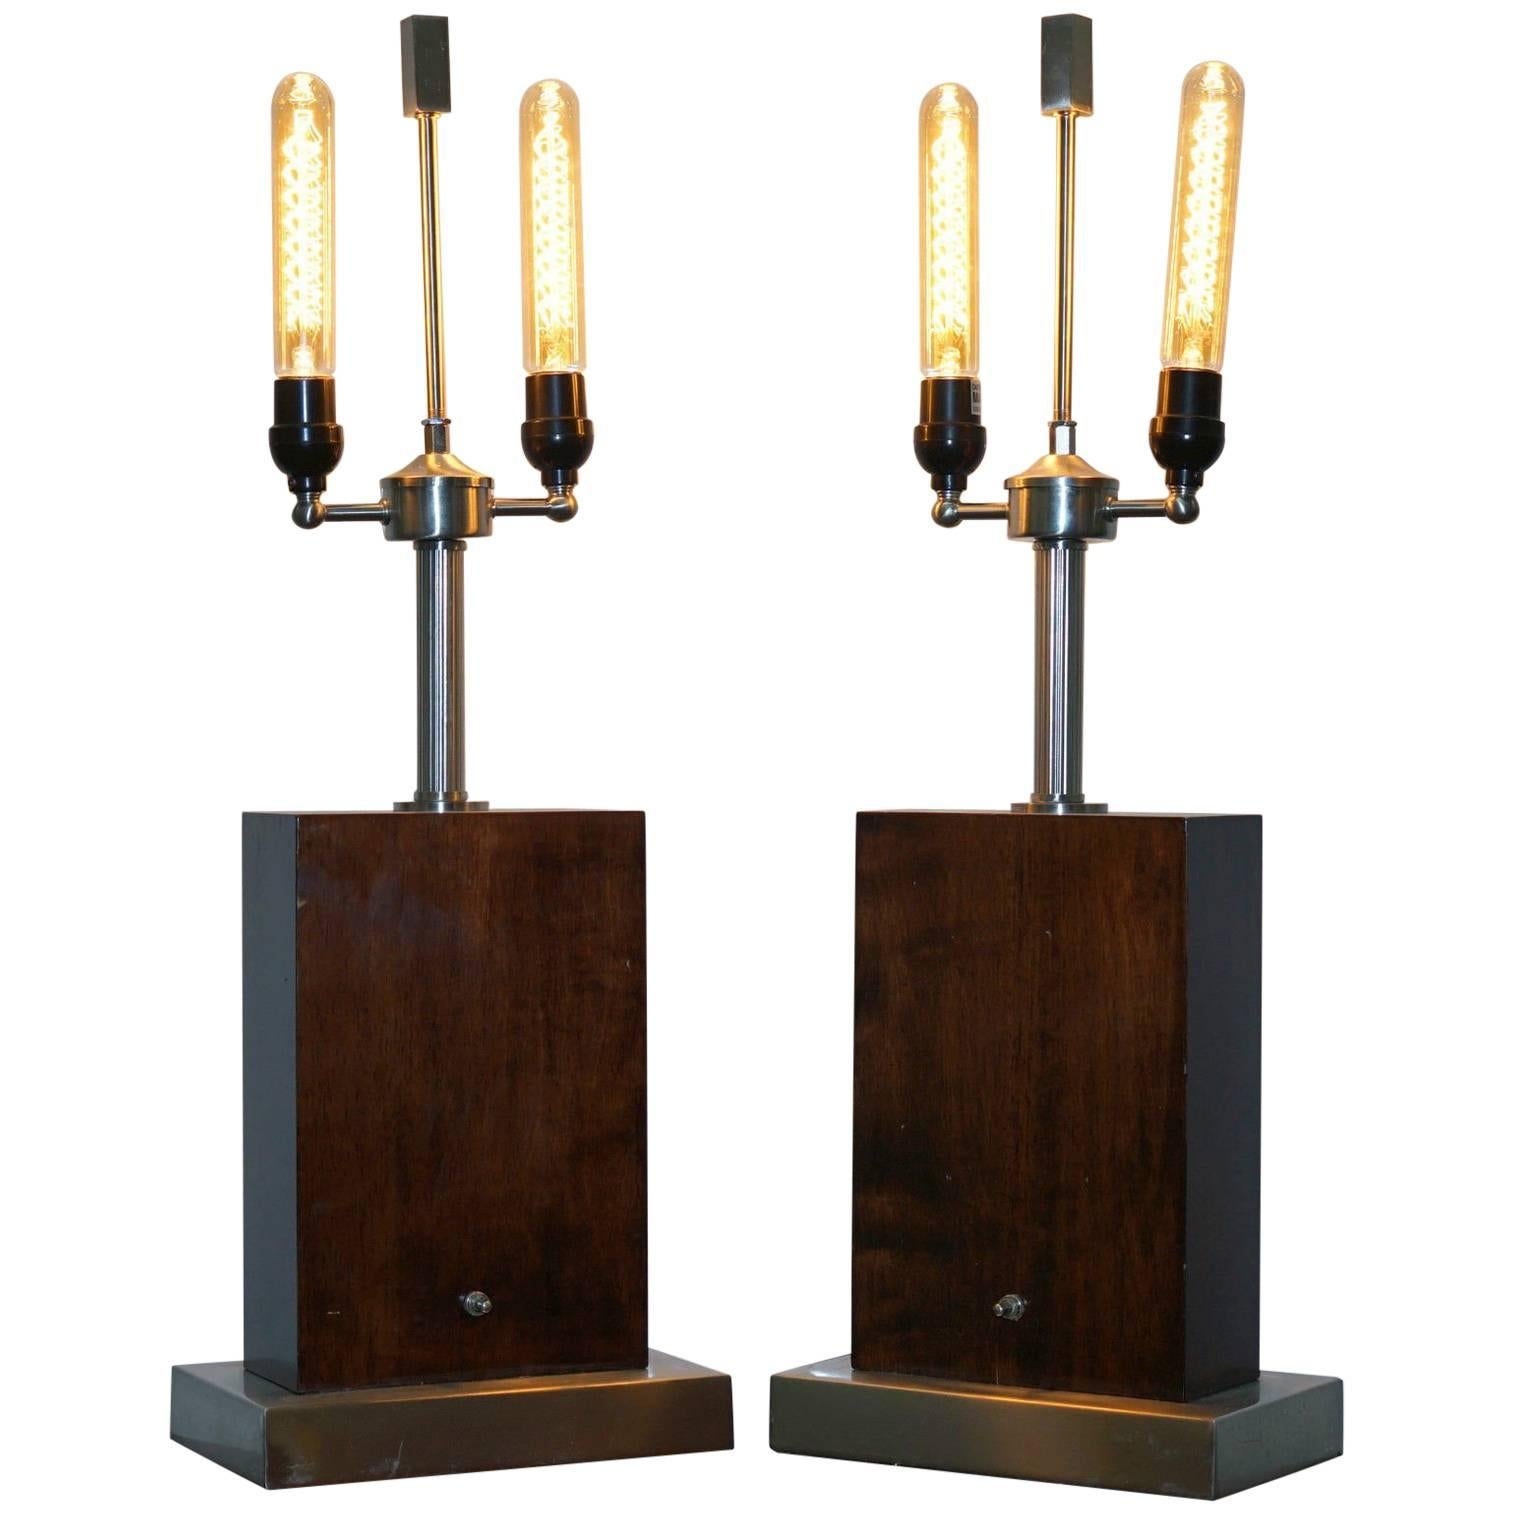 Pair of Stunning Ralph Lauren Rosewood and Chrome Table Lamps Rare Find